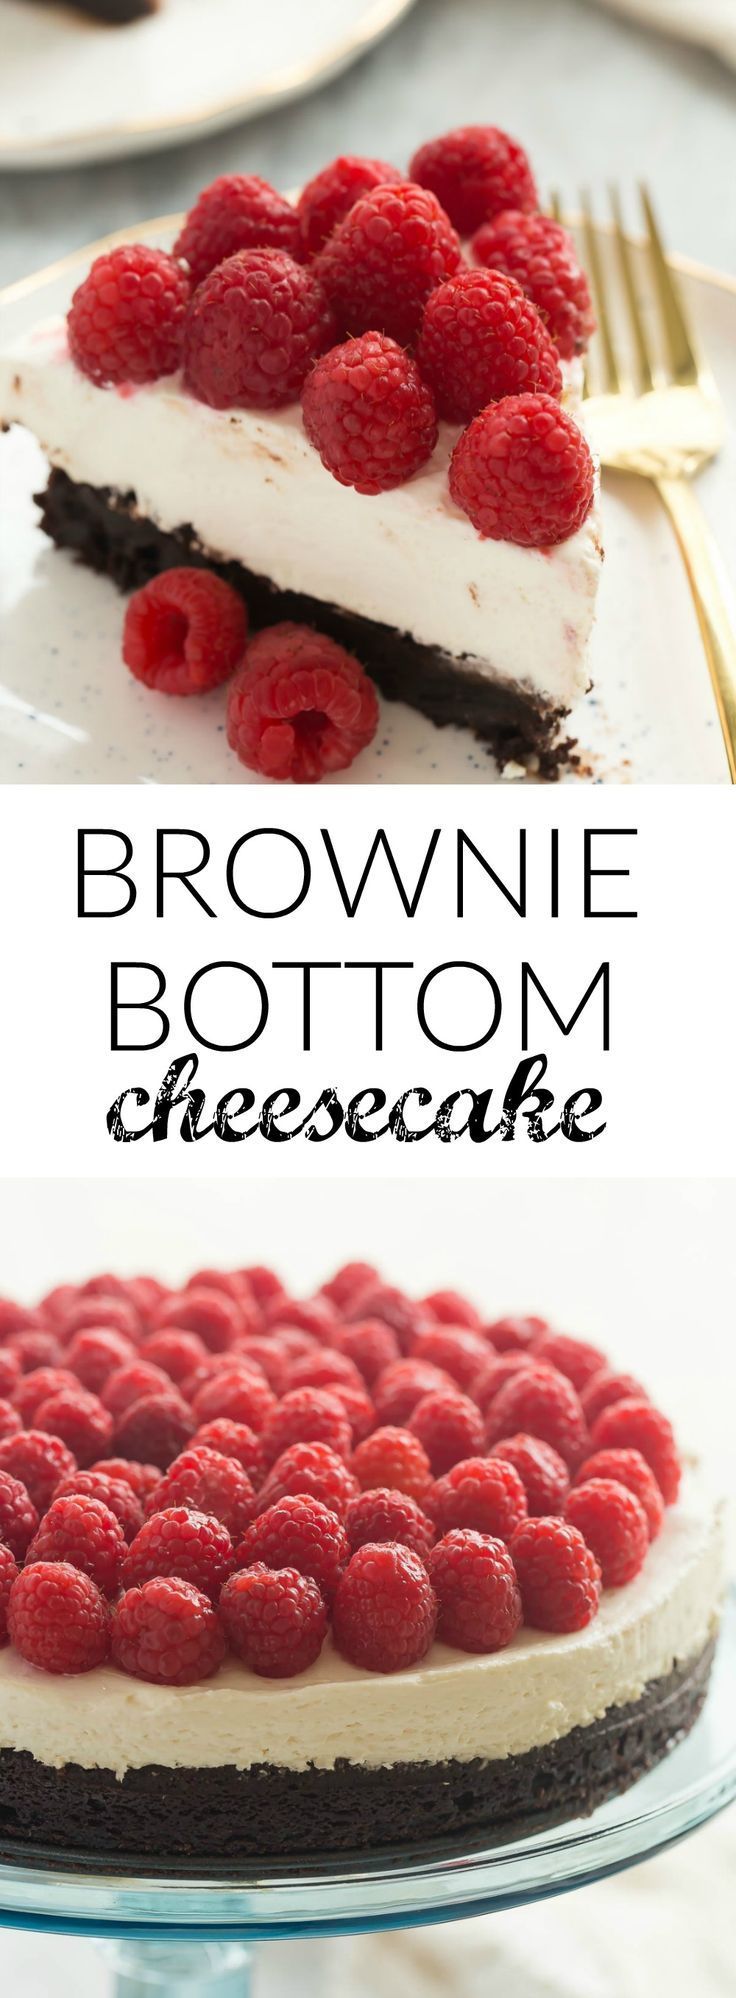 This Brownie Bottom Cheesecake is made with a fudgy, brownie base, a silky smooth no bake cheesecake and topped with piles of